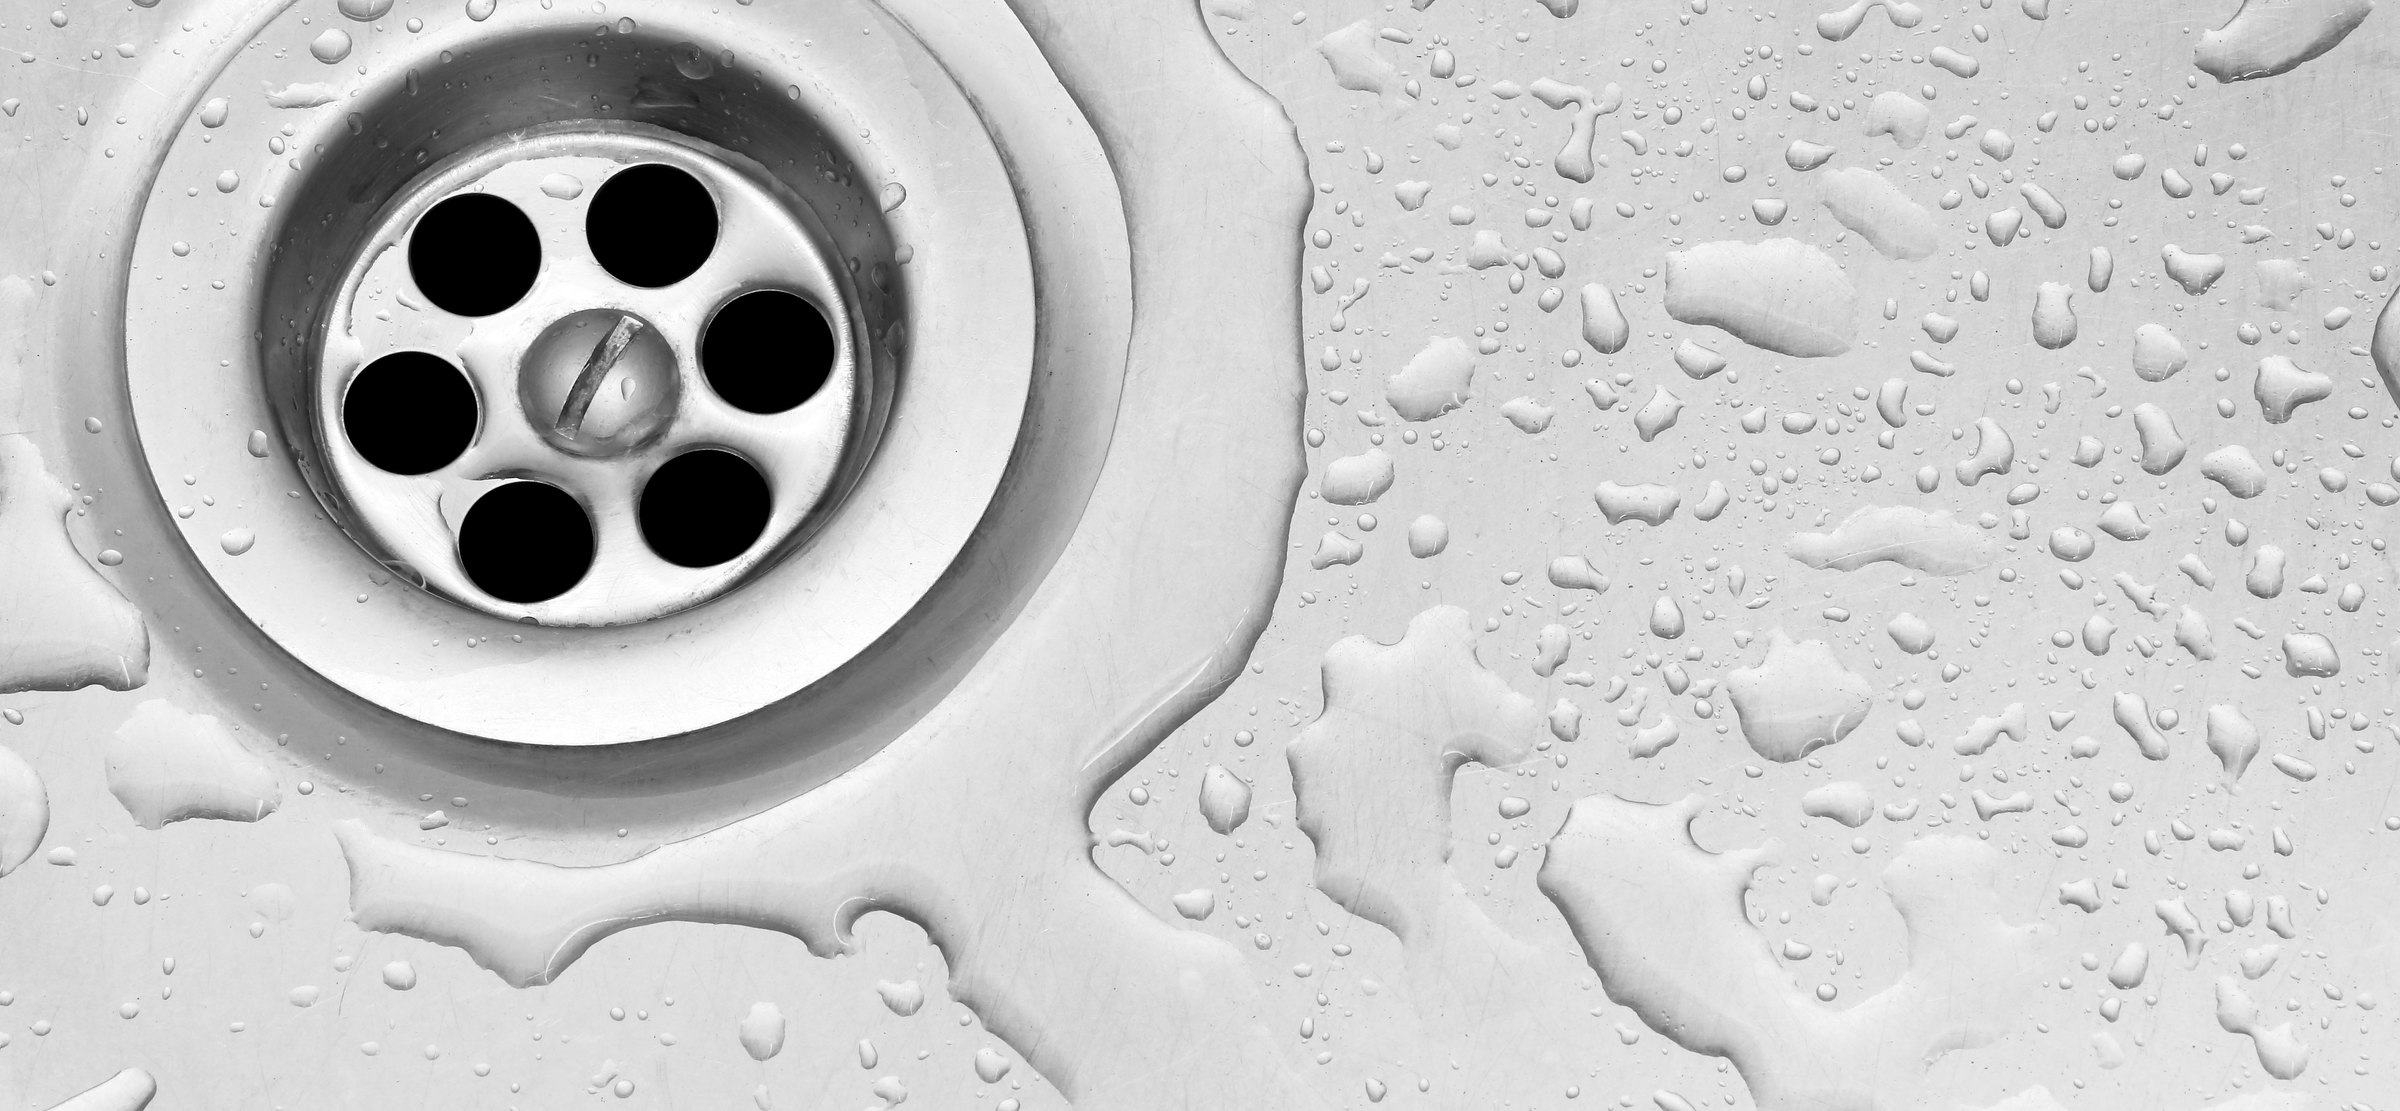 Drain Cleaner Service - Unclogged Any Drain, Toilet or Sink ...